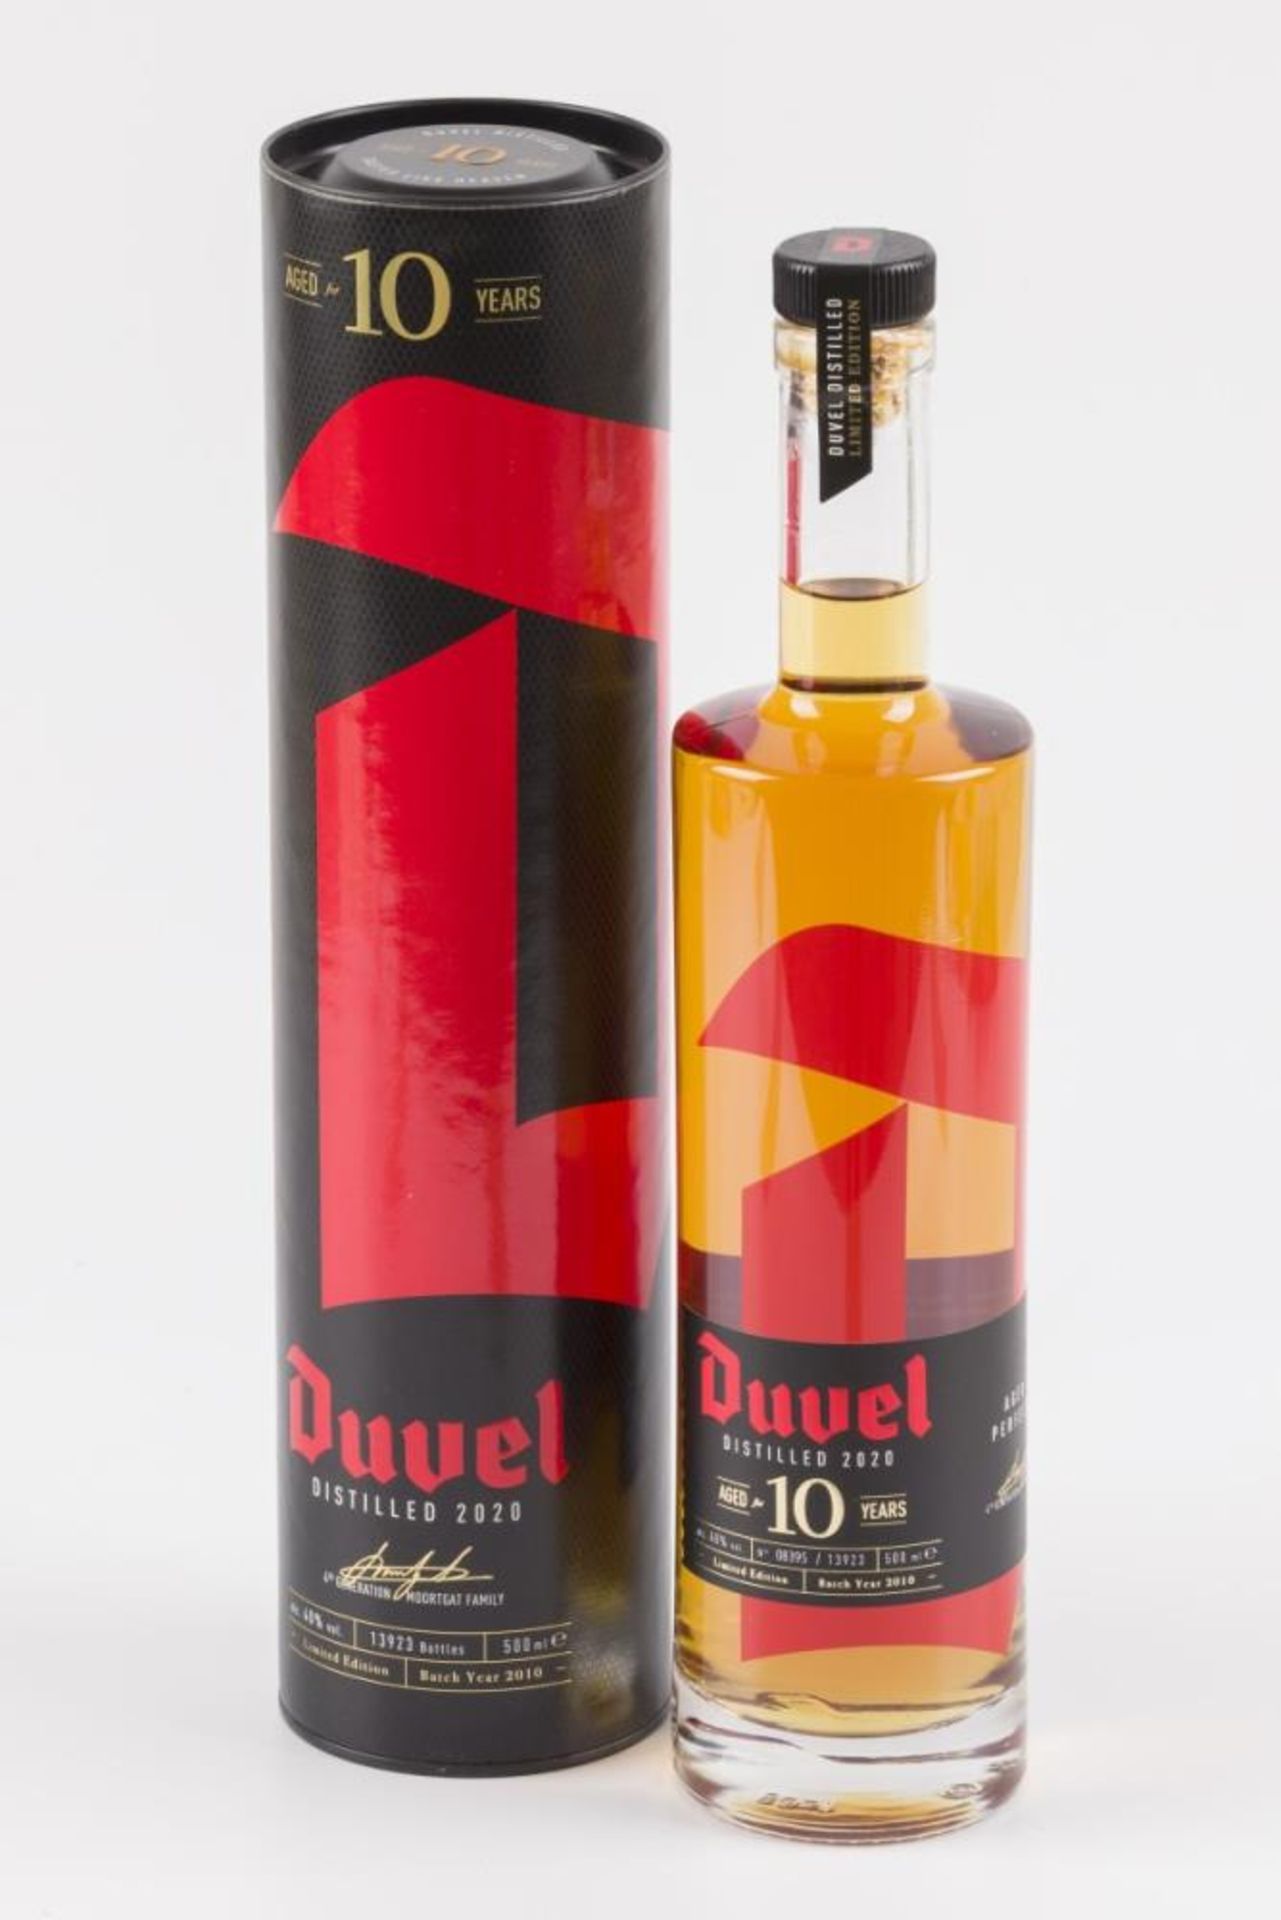 Duvel 10 years old Distilled Limited Edition 2020 - 50cl - Image 2 of 2